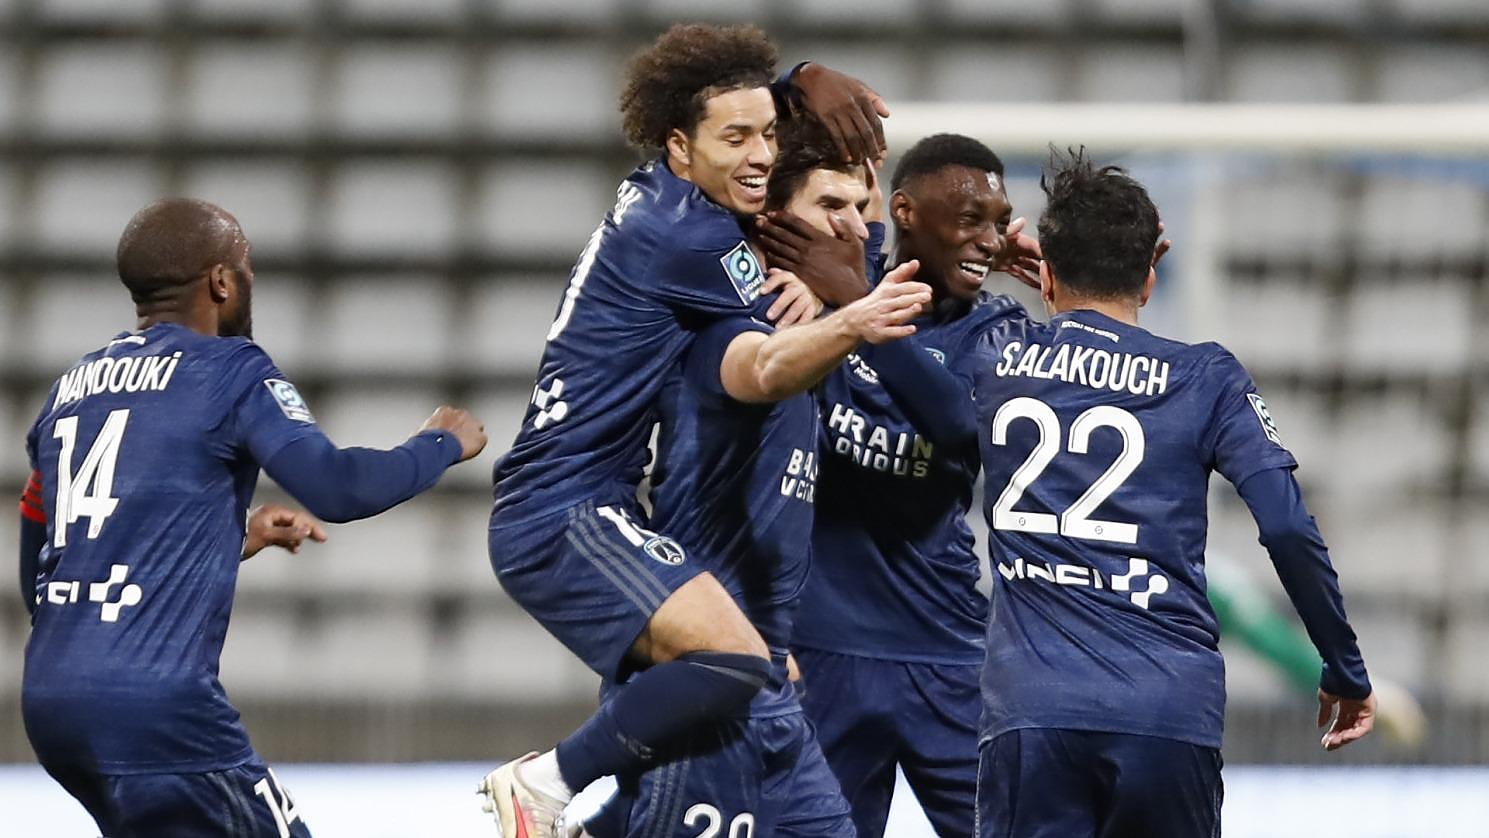 Ligue 2: he scores with a 54-meter lob, Pierre-Yves Hamel’s brilliant goal on video